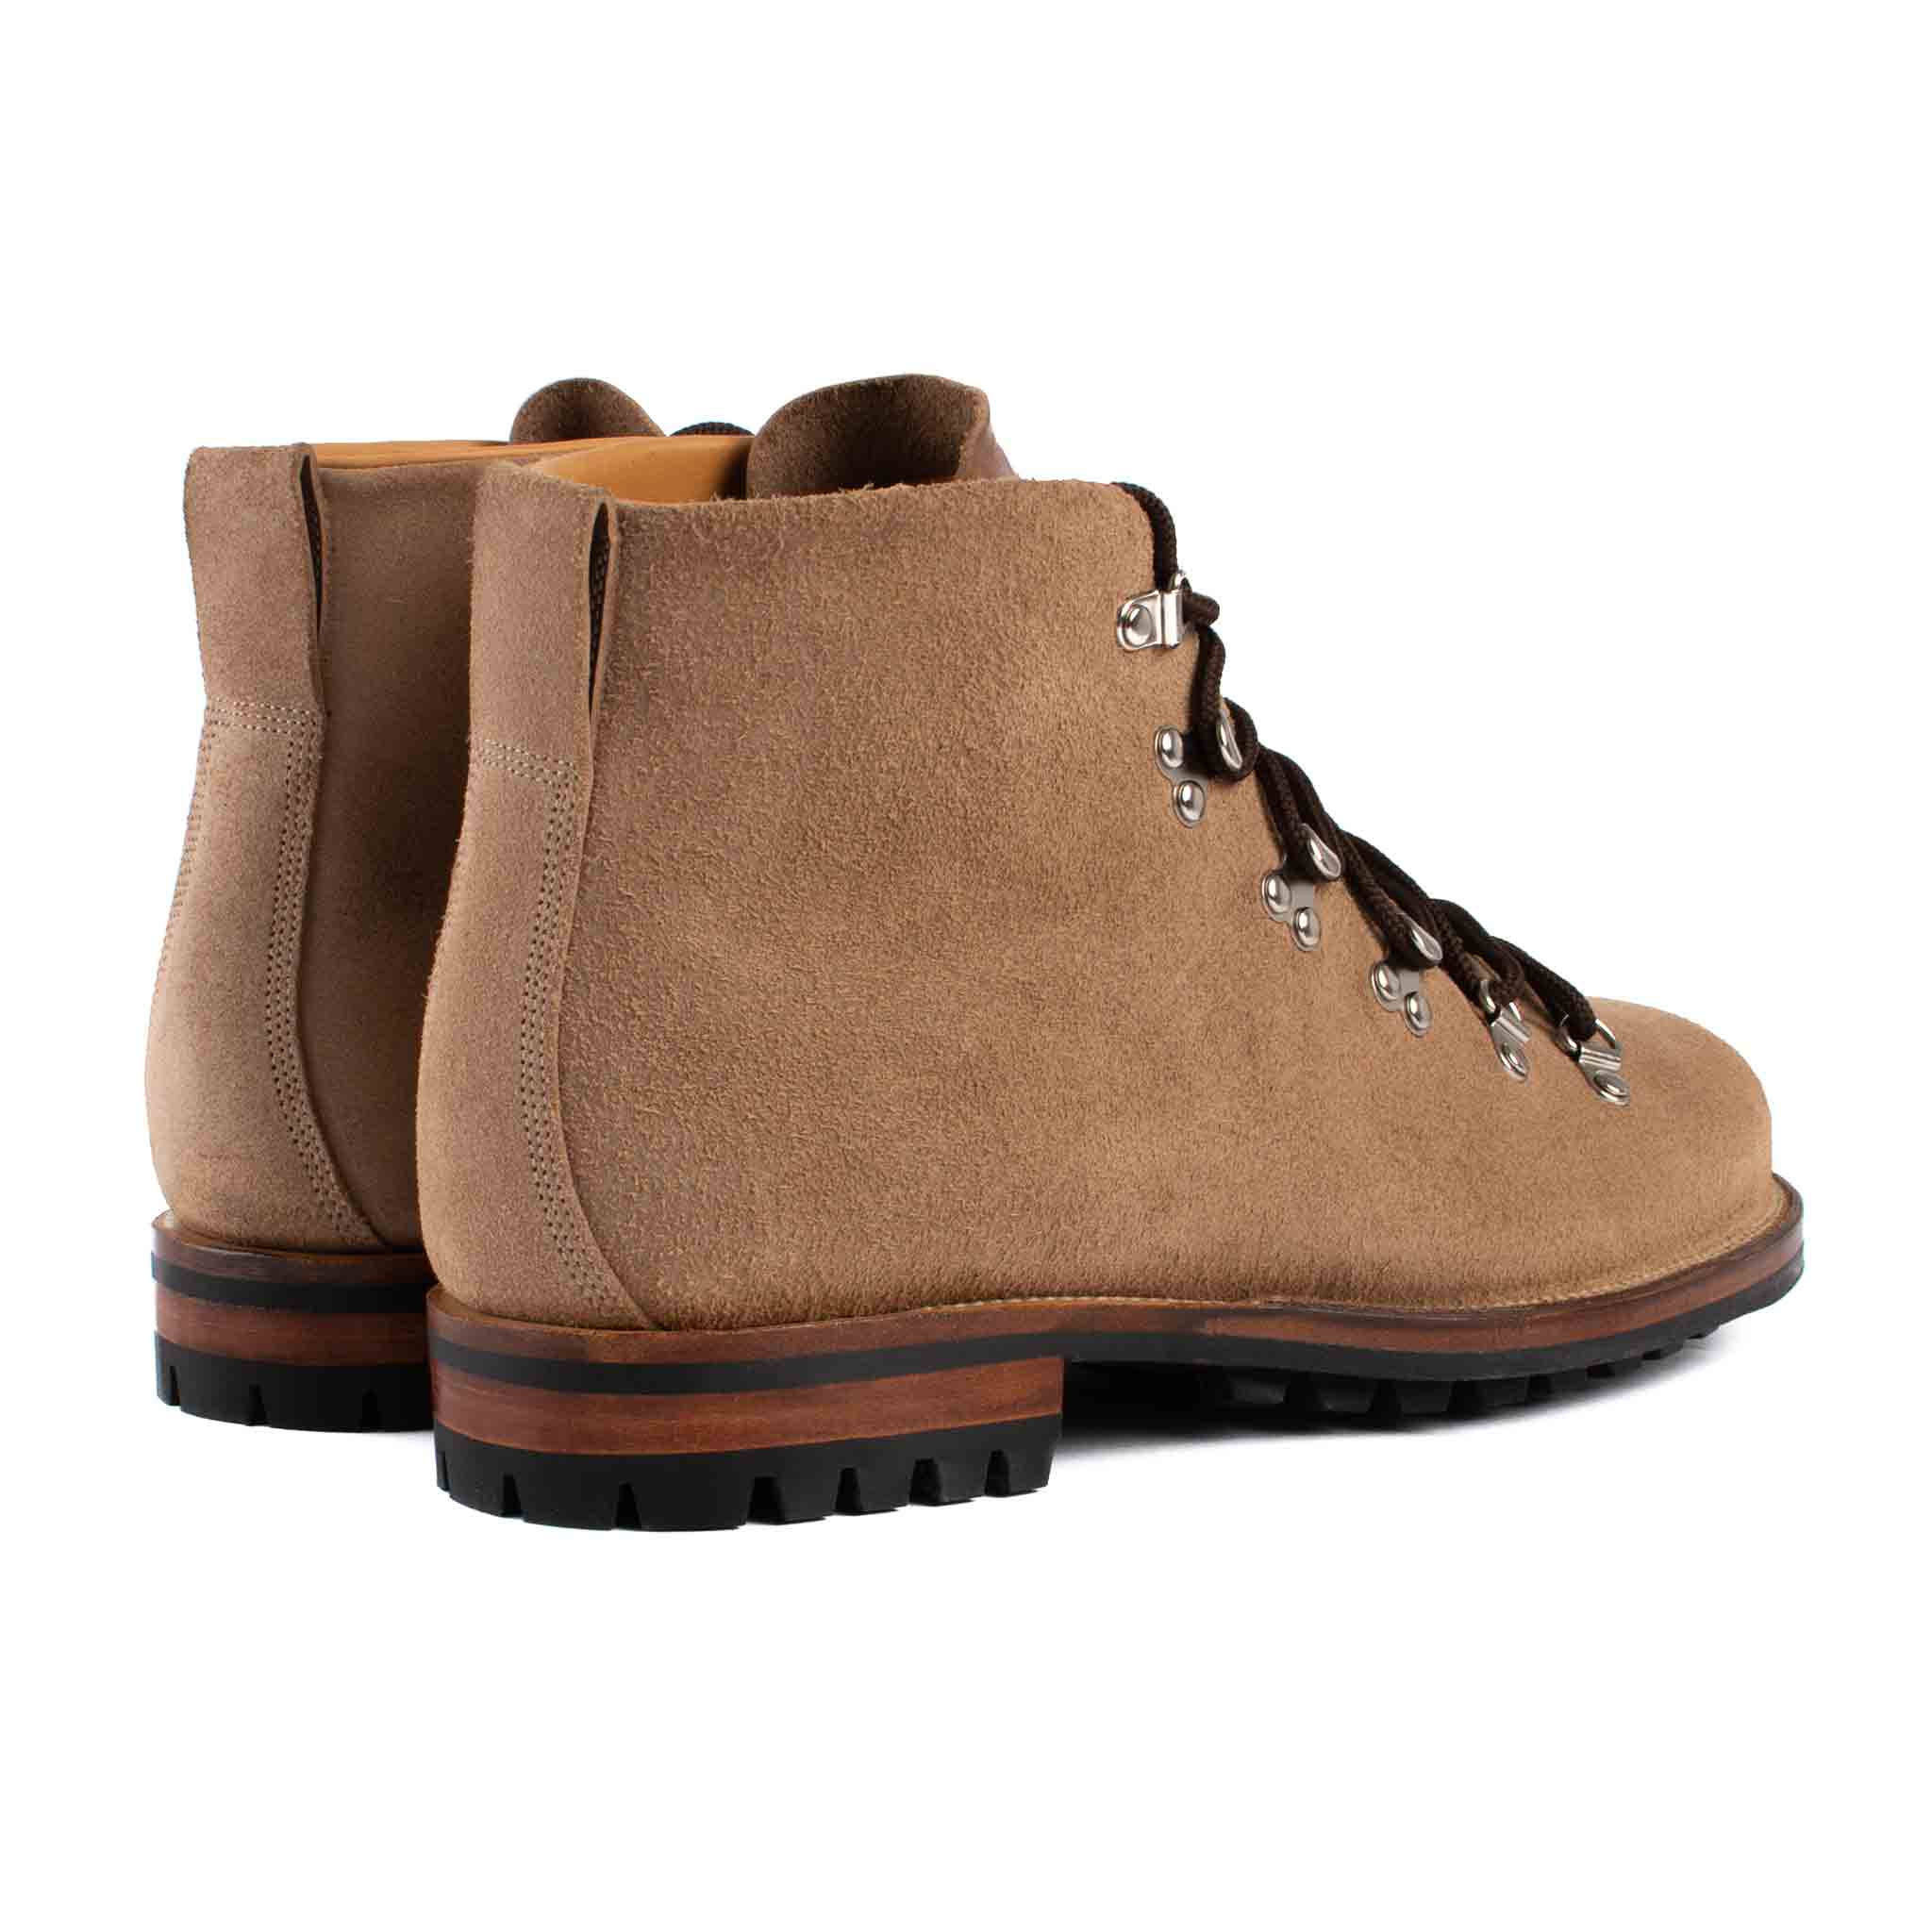 Viberg_natural_chromexcel_roughout_hiker_with_commando_sole_back